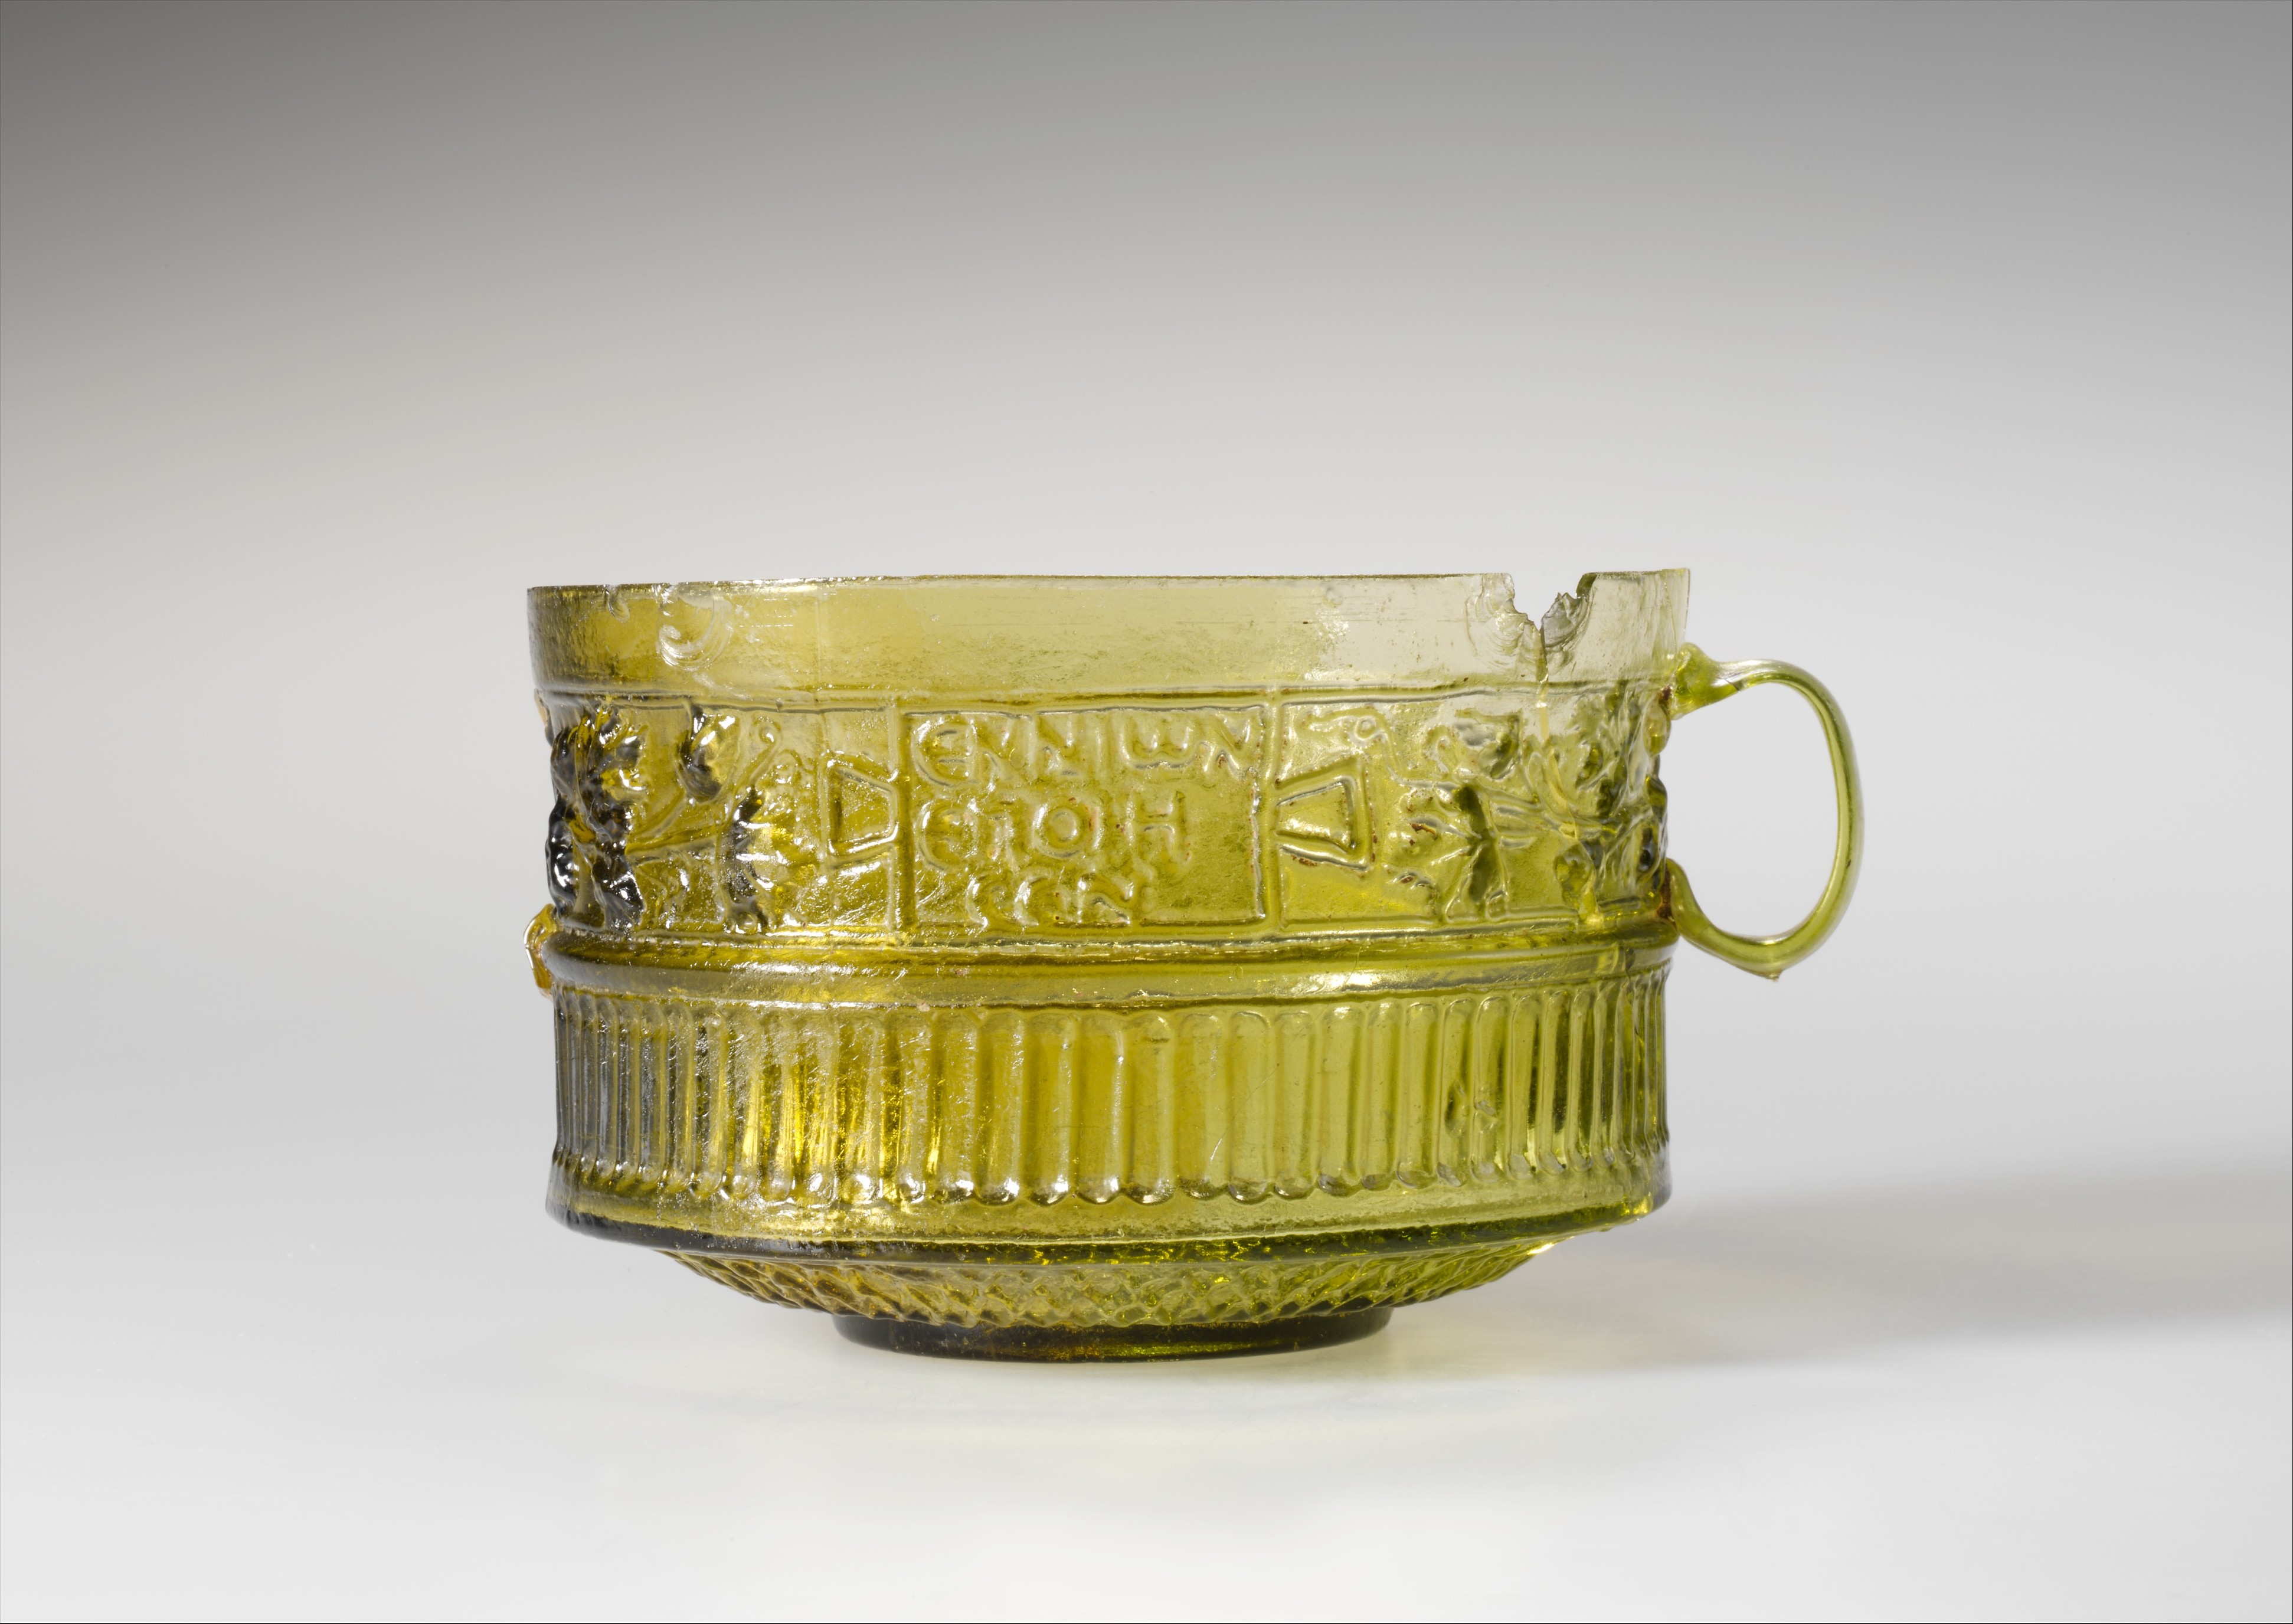 Ancient Roman era yellow glass cup with Greek inscription made by an artisan named Ennion, c. 1st century CE.jpg